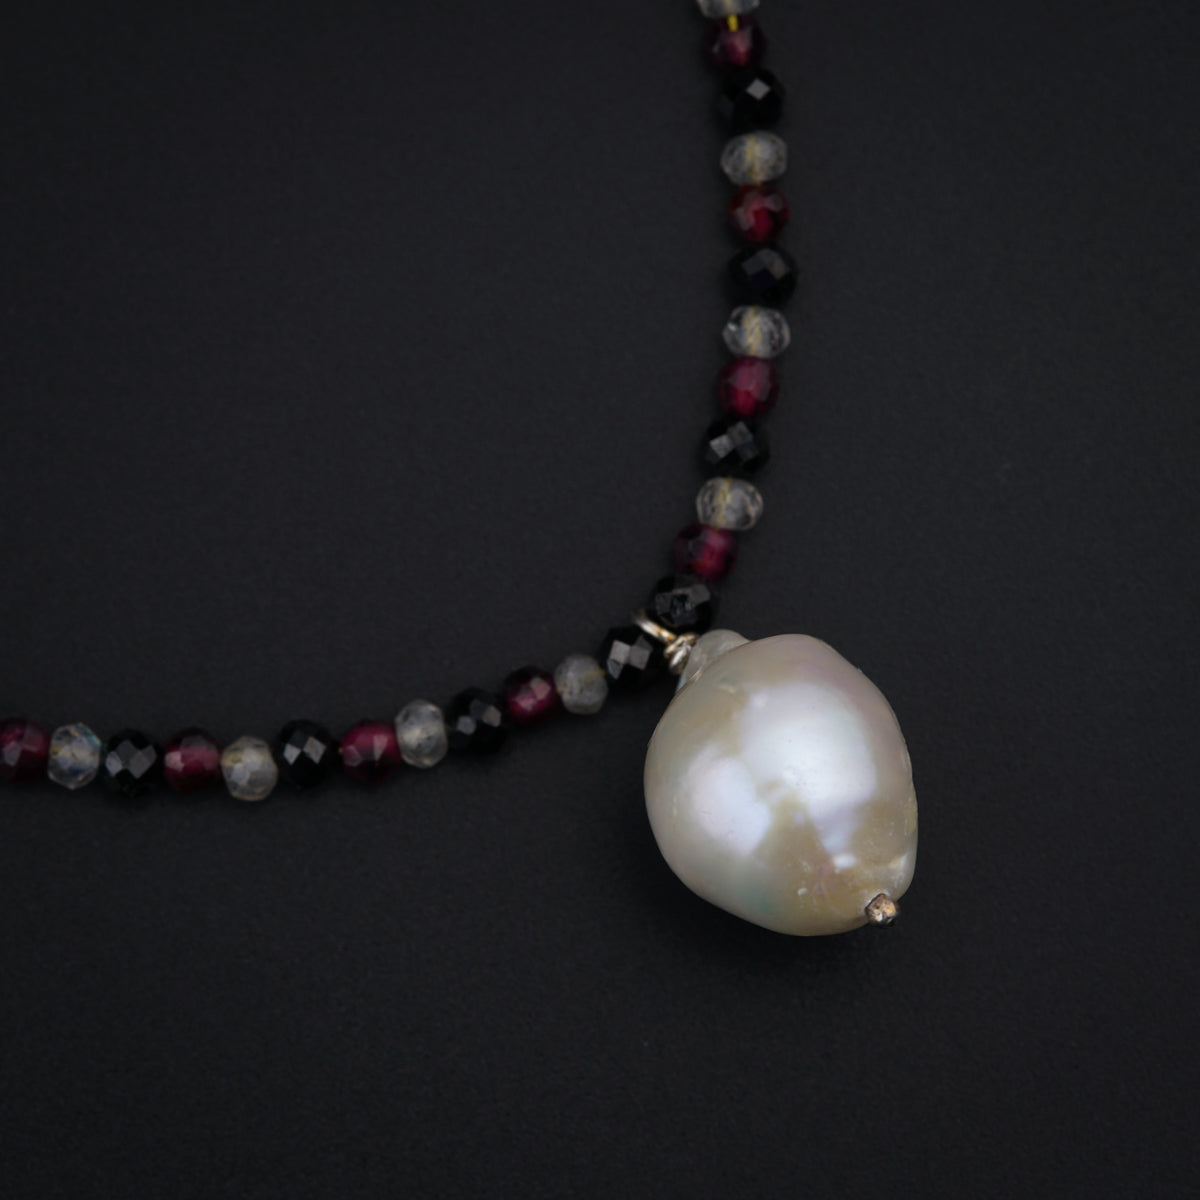 a necklace with a large white pearl on a black background